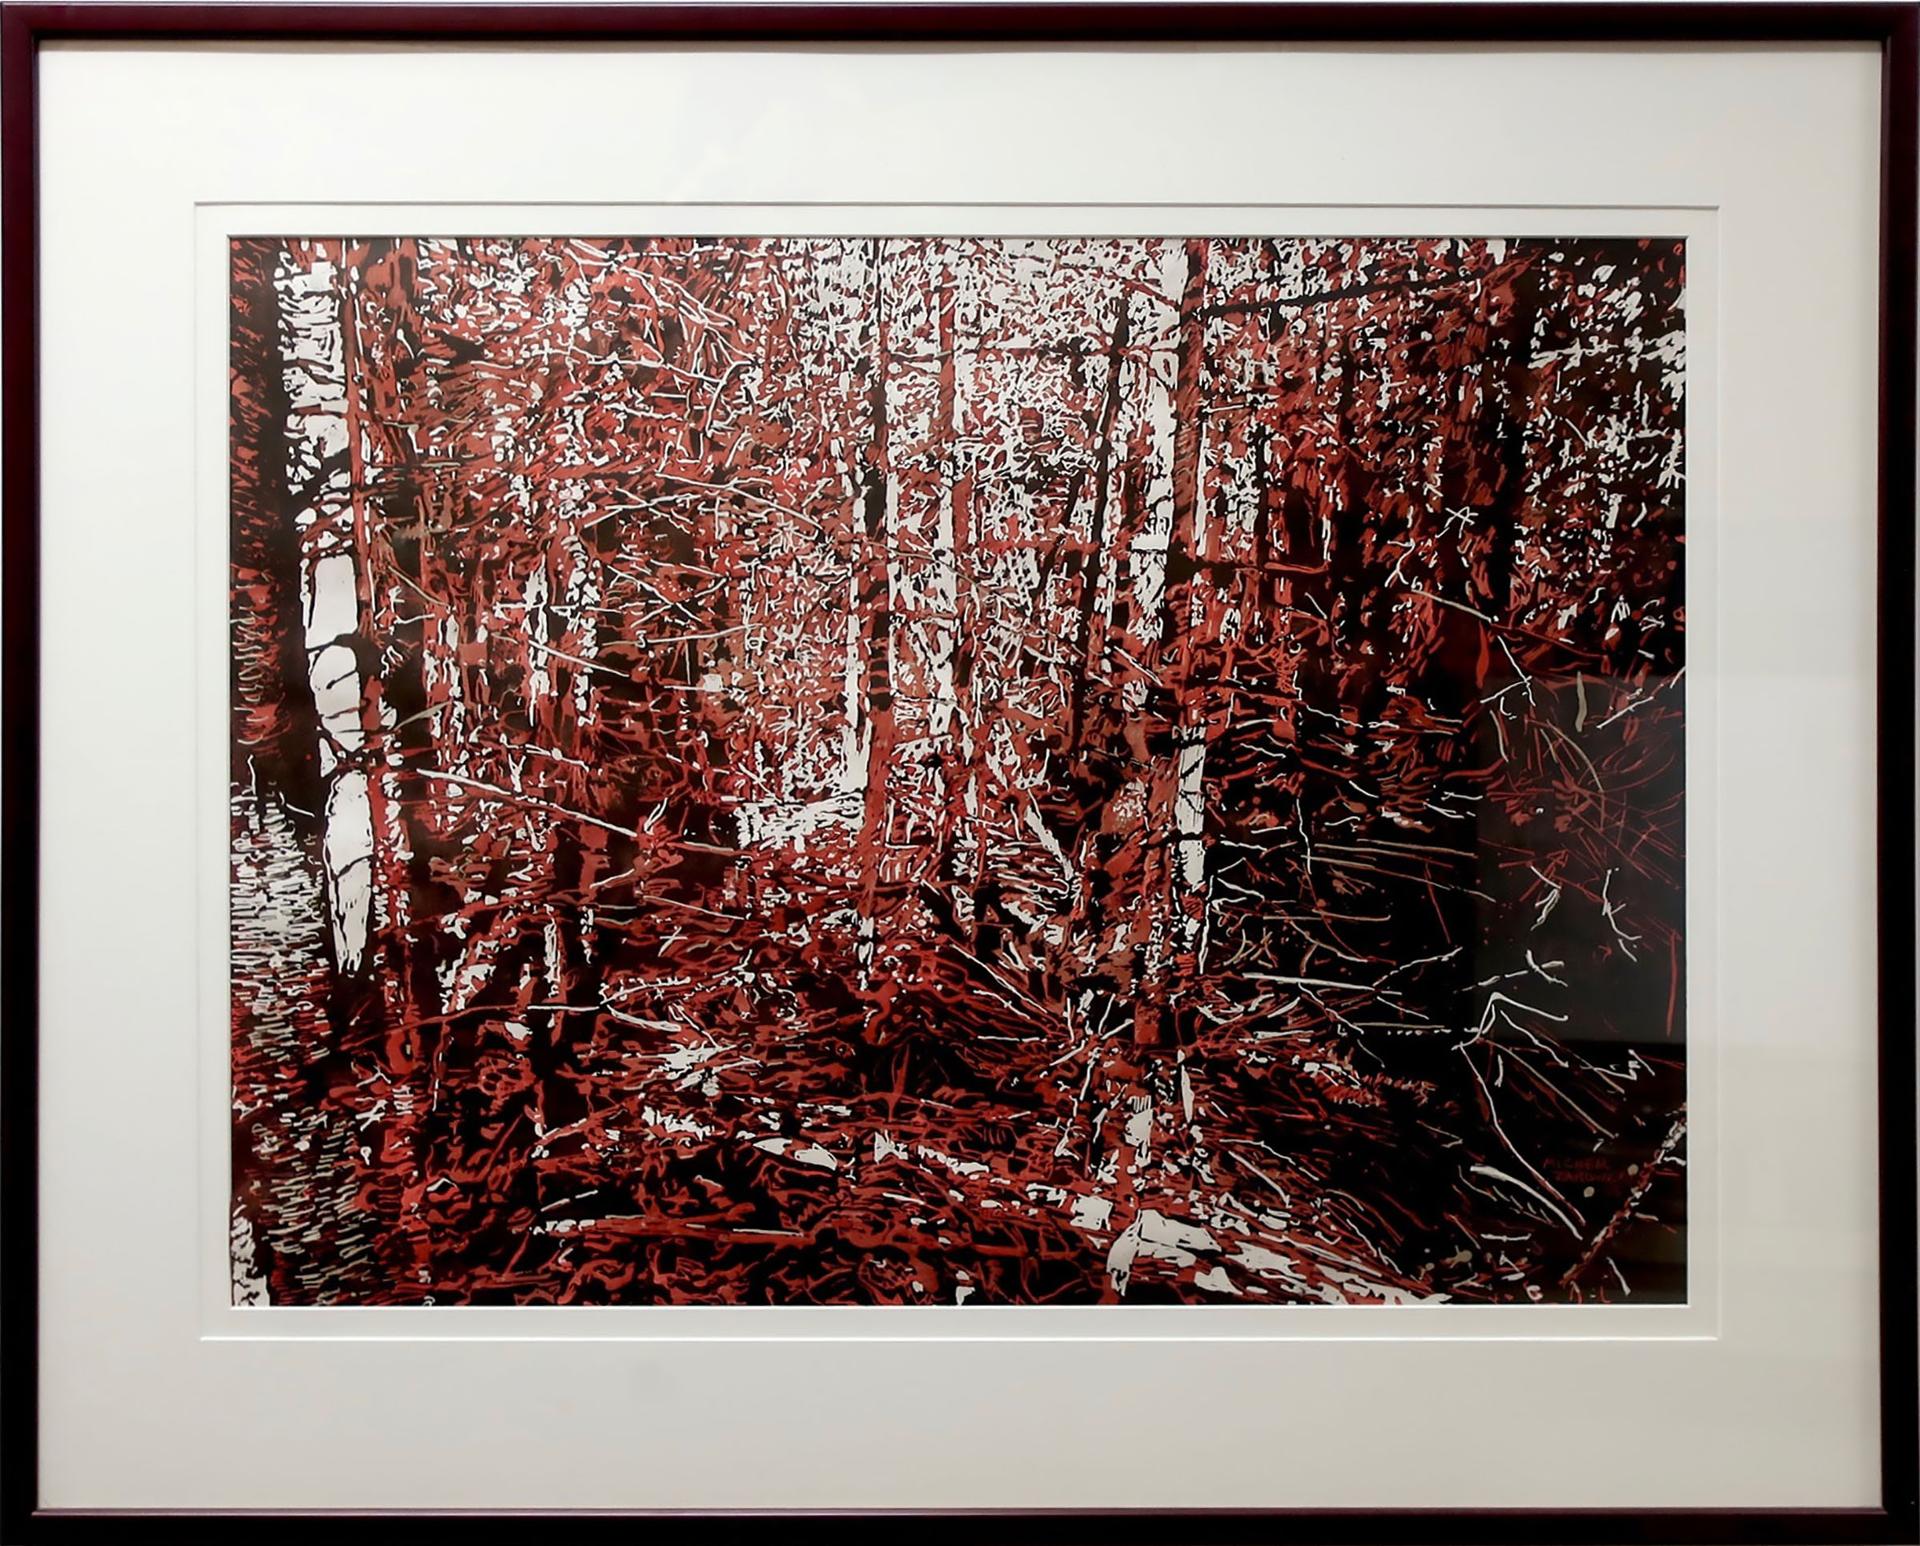 Michael Zarowsky (1946) - Red Forest